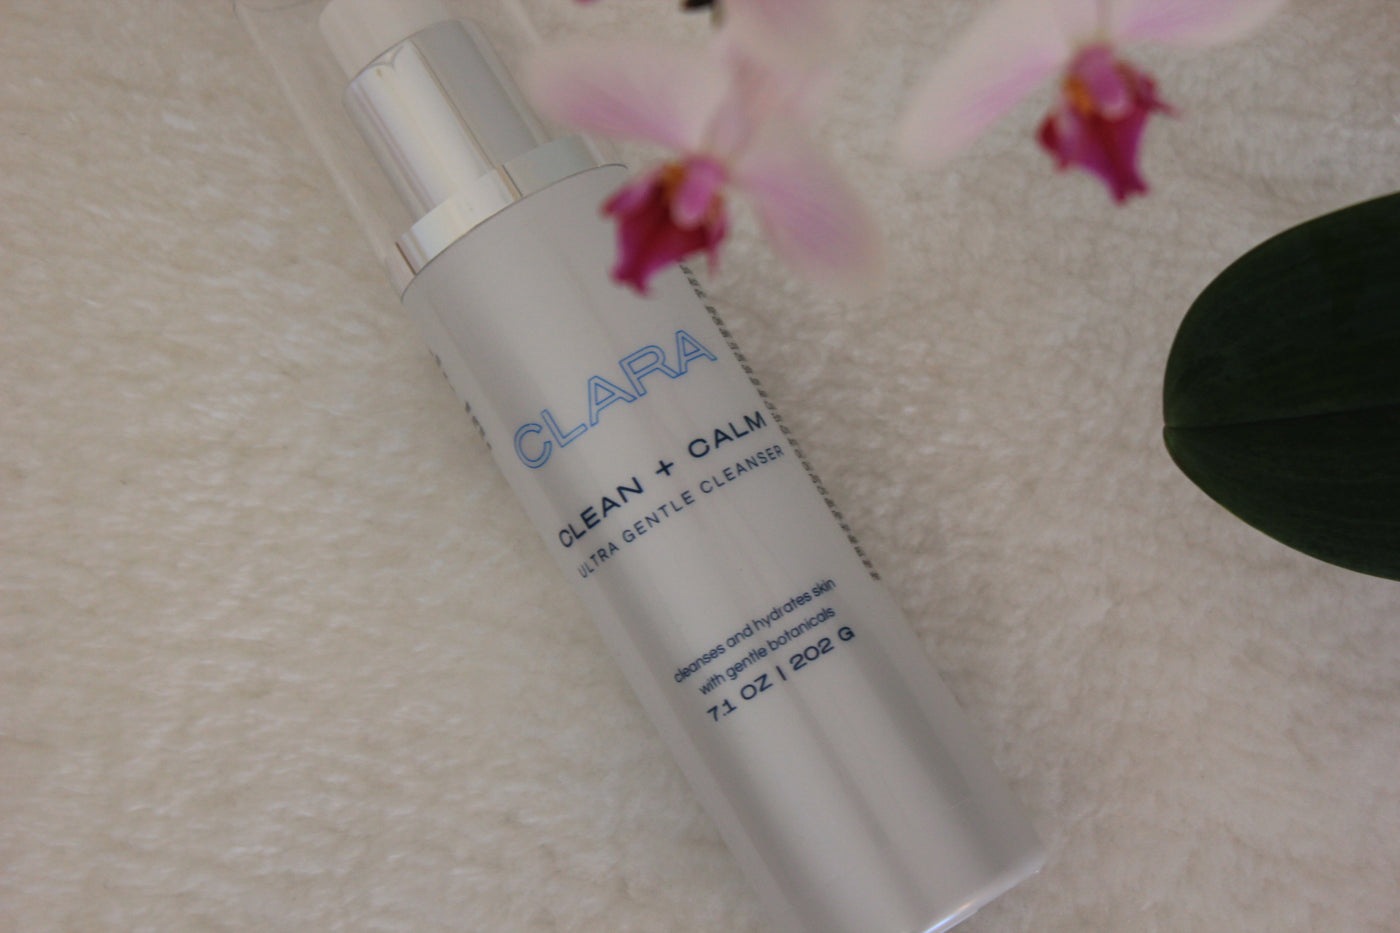 Clean + Calm Cleanser: Formulated with a hydrating octapeptide complex and soothing botanicals to condition the skin and leave it clean and soft